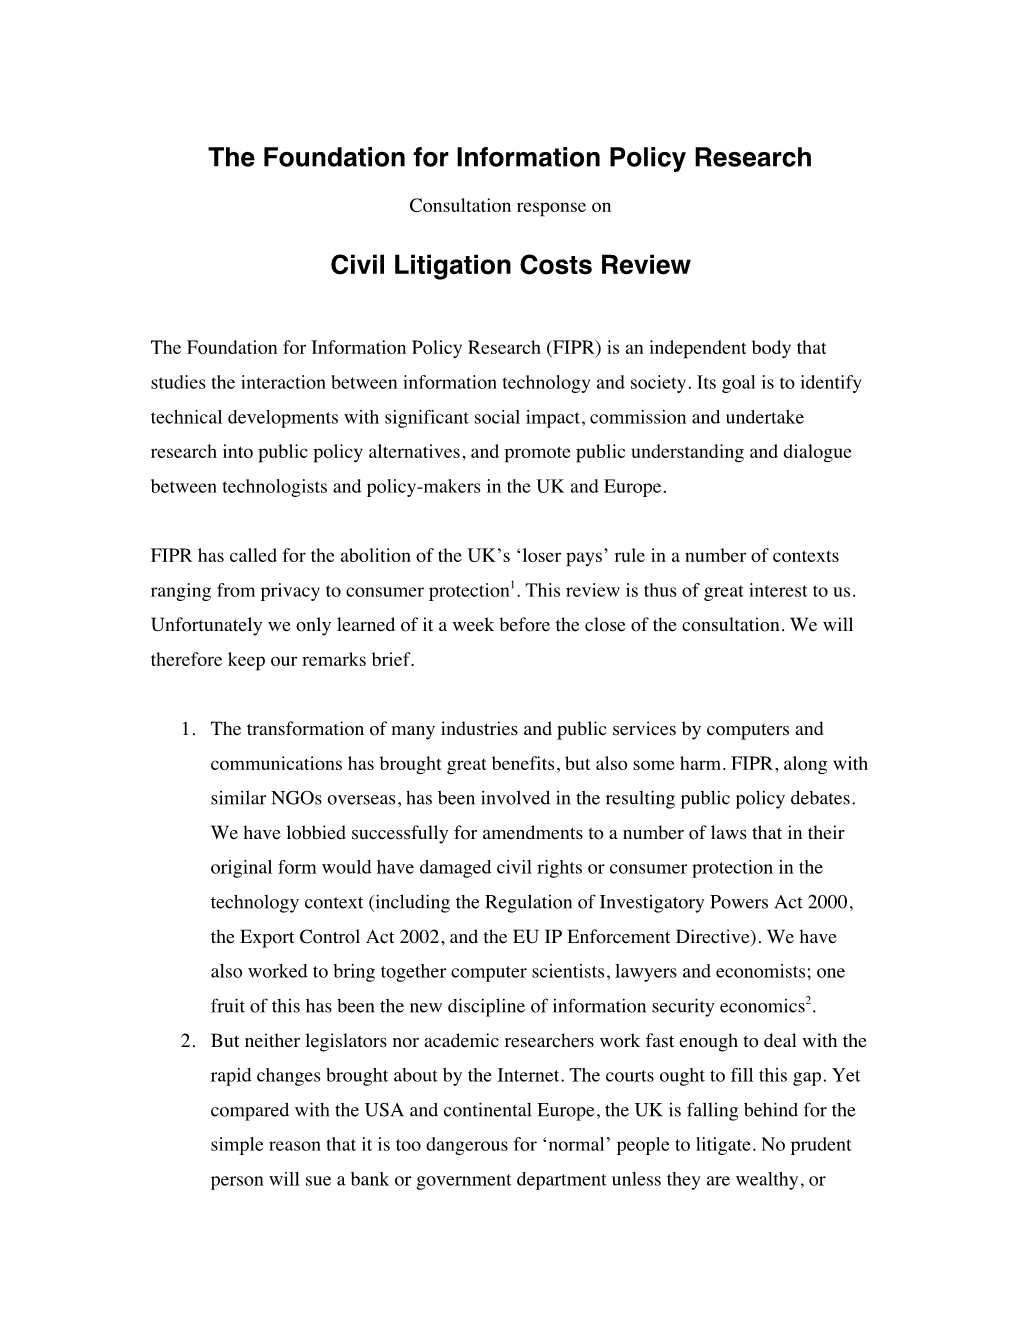 The Foundation for Information Policy Research Civil Litigation Costs